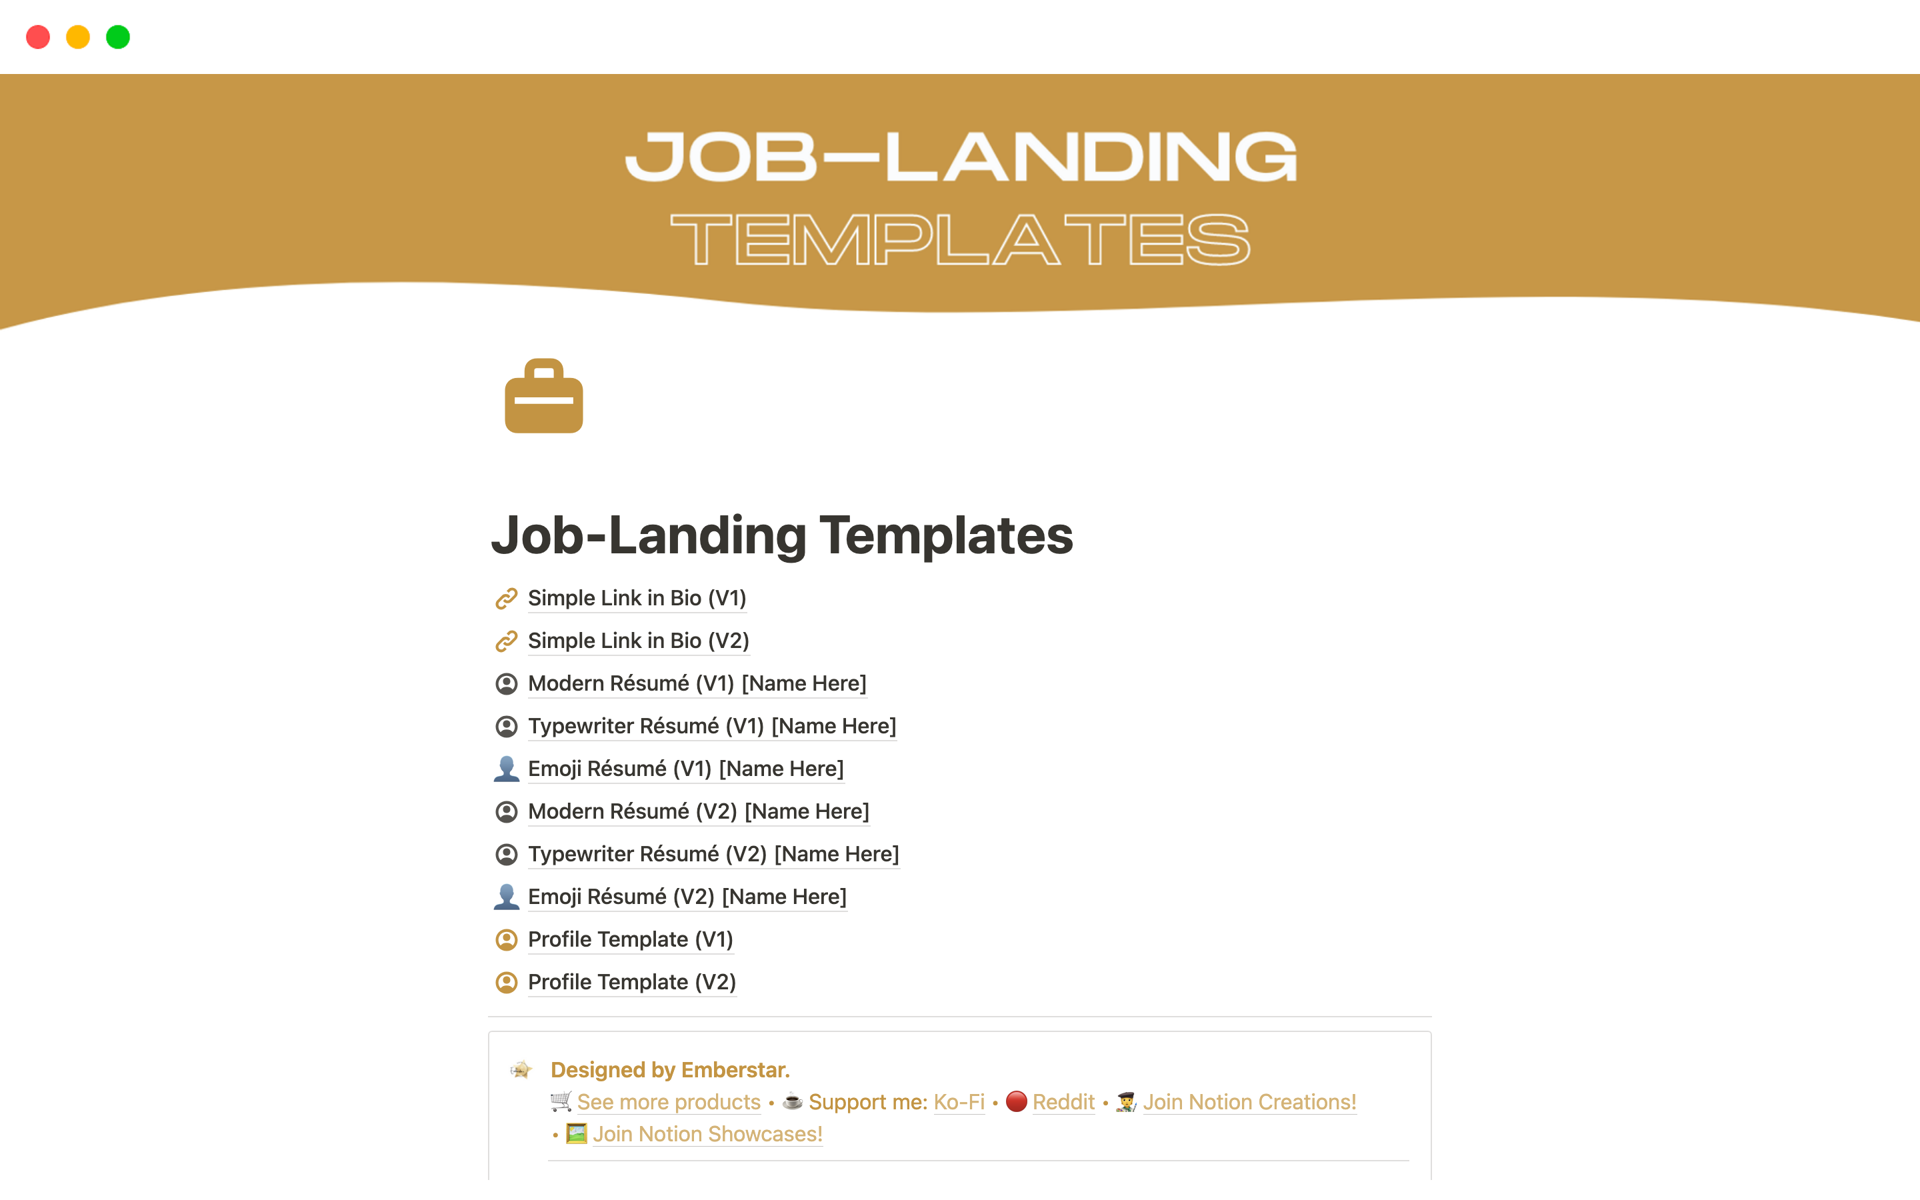 A template preview for 10 Job-Landing Templates